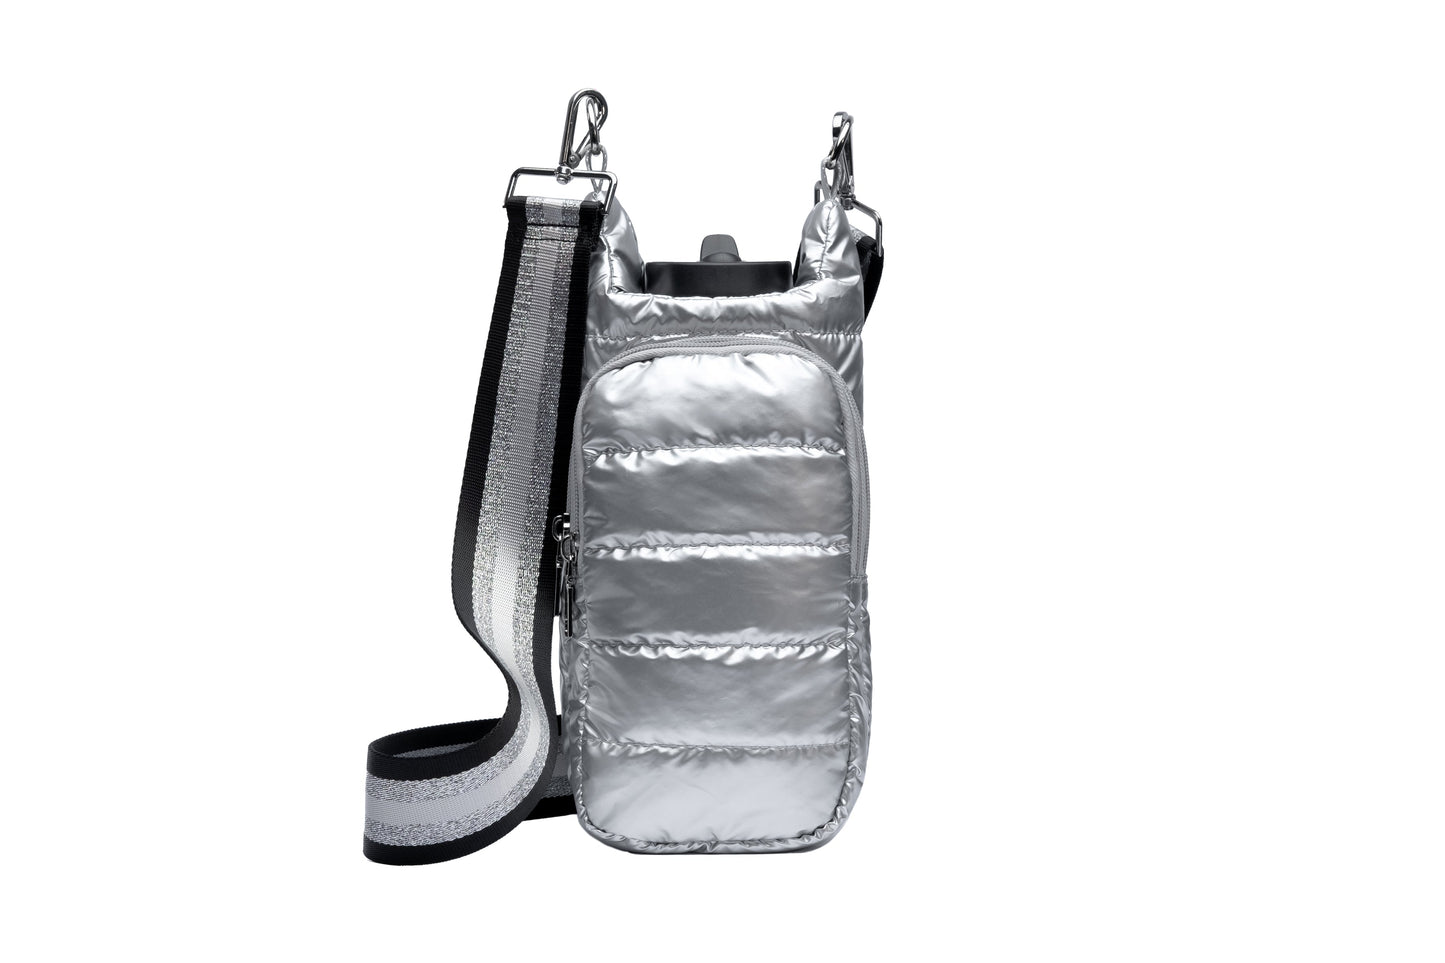 Wholesale Packs (2, 6, or 10) - Silver Shiny HydroBag with Black/Silver/White Strap